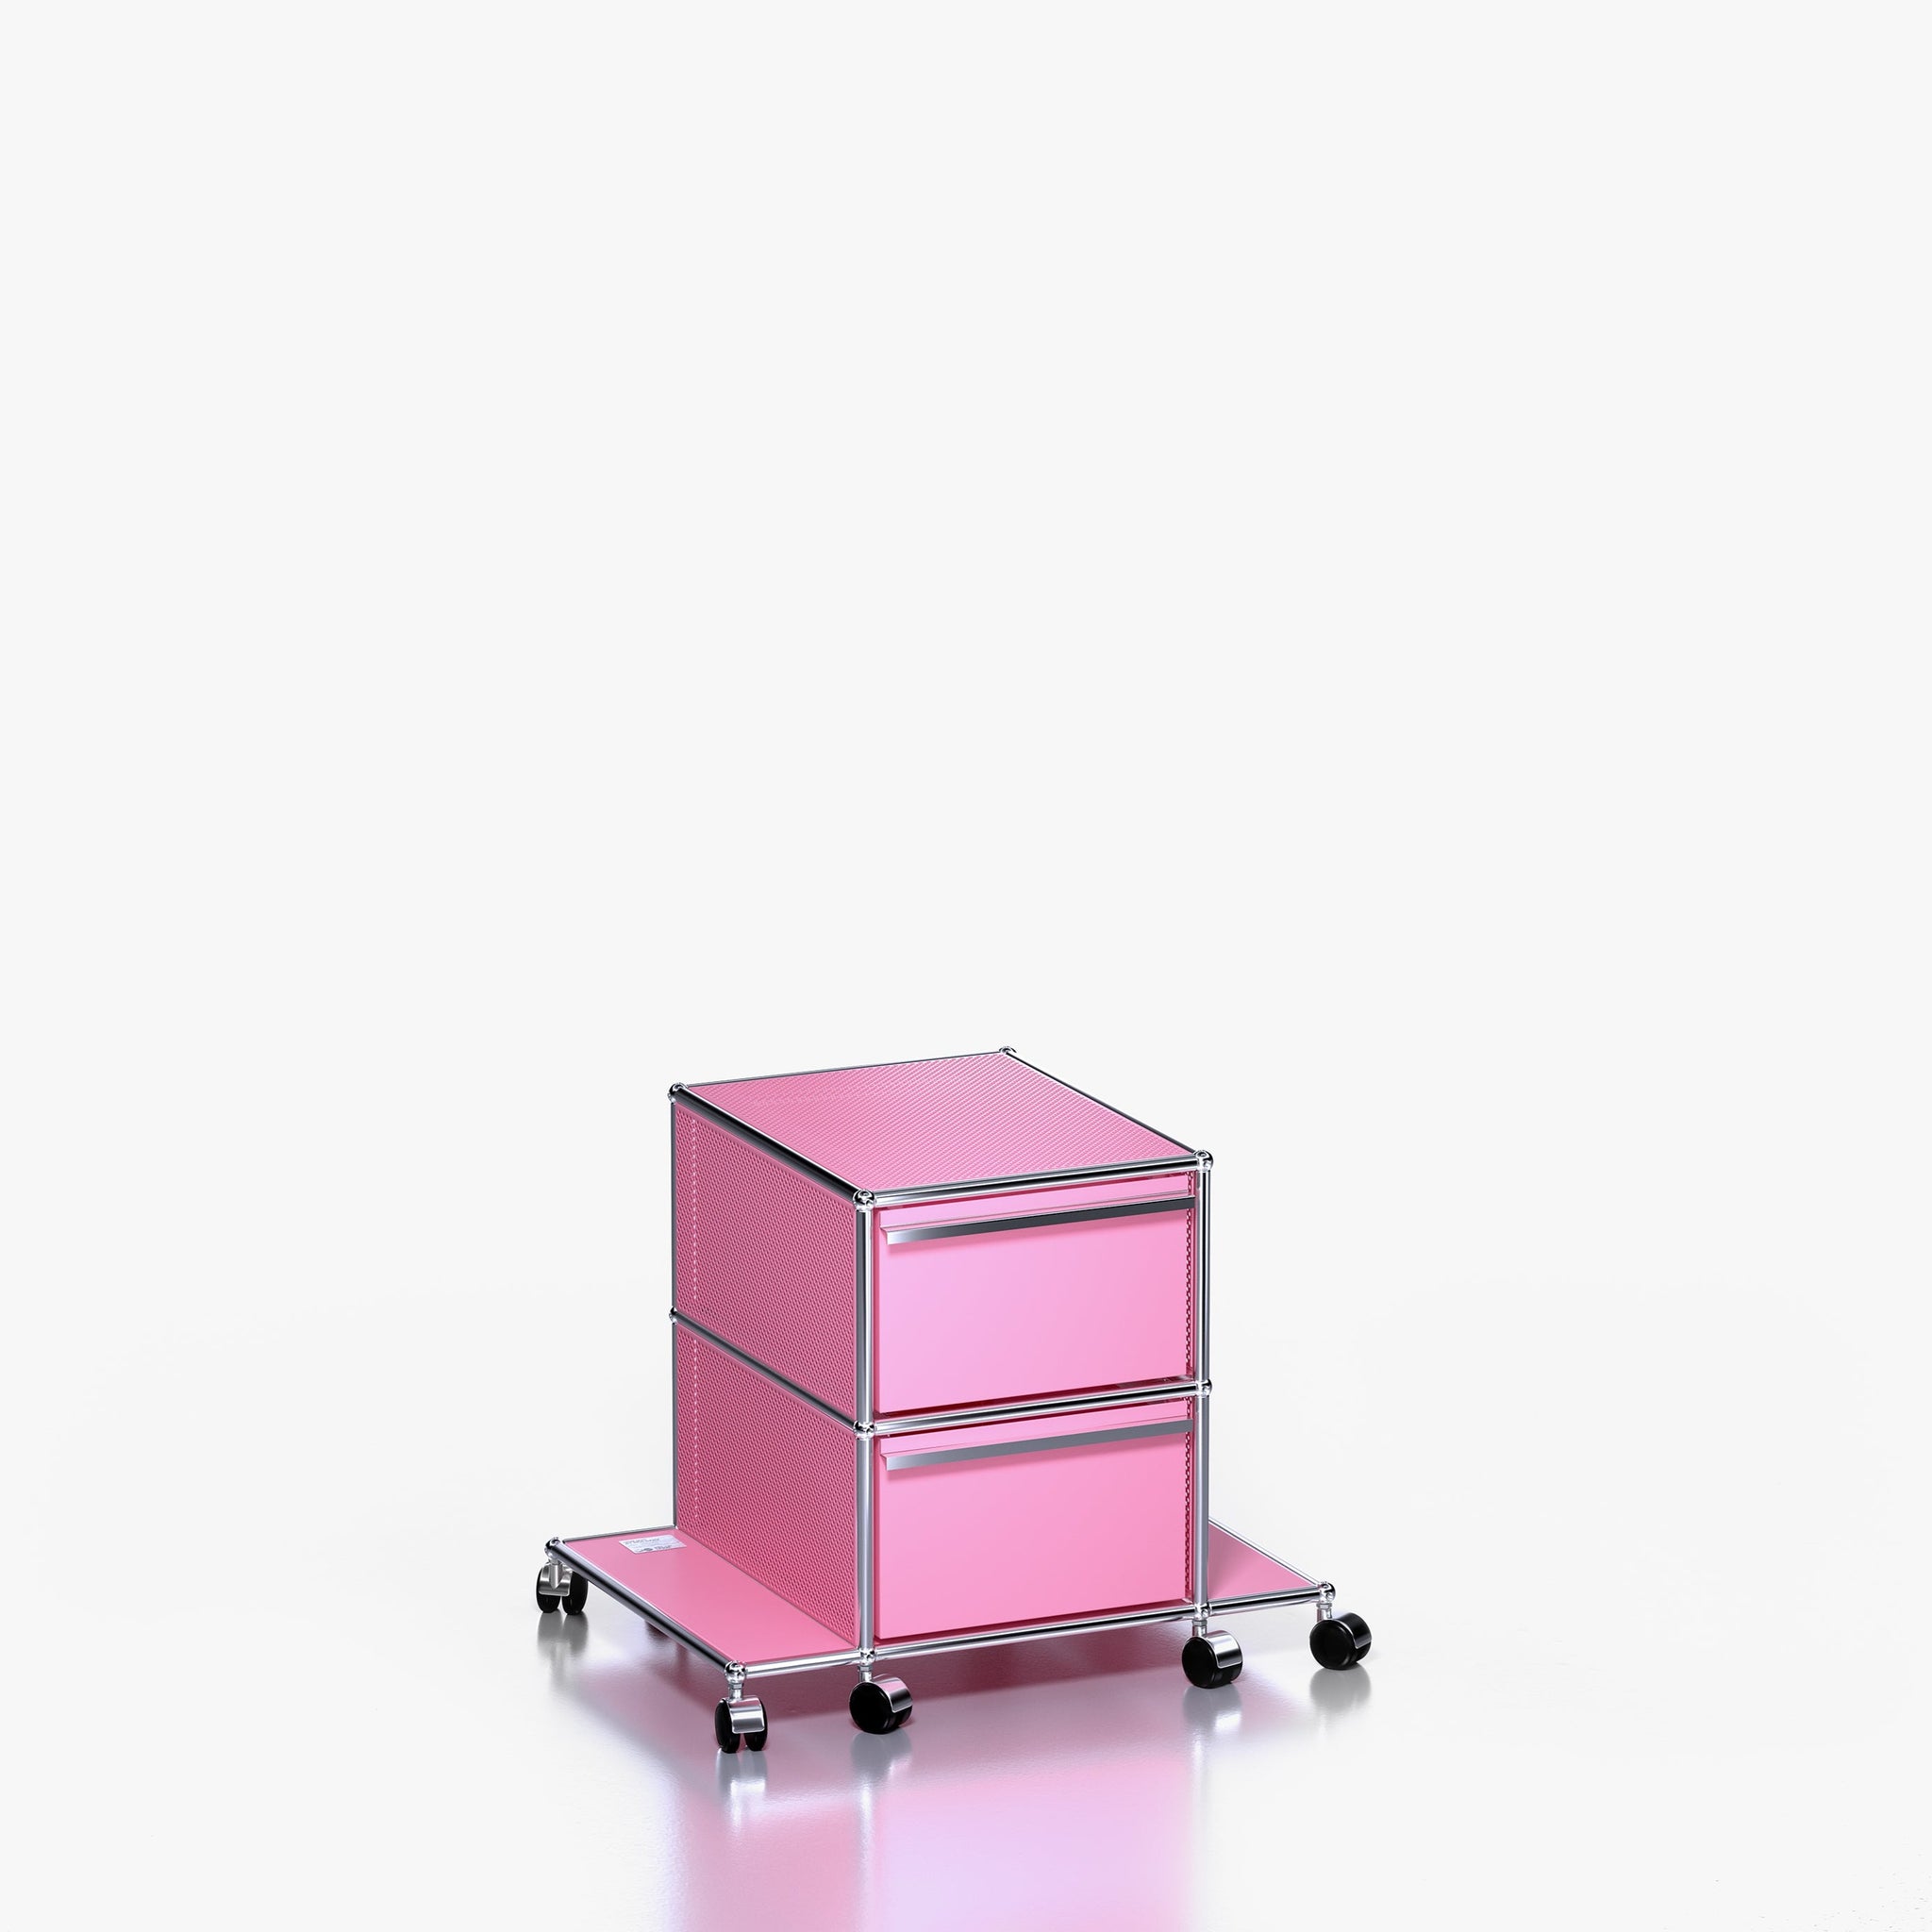 Tower E (Depot): Mobile Pedestal Cabinet in Downtown Pink (Side View)